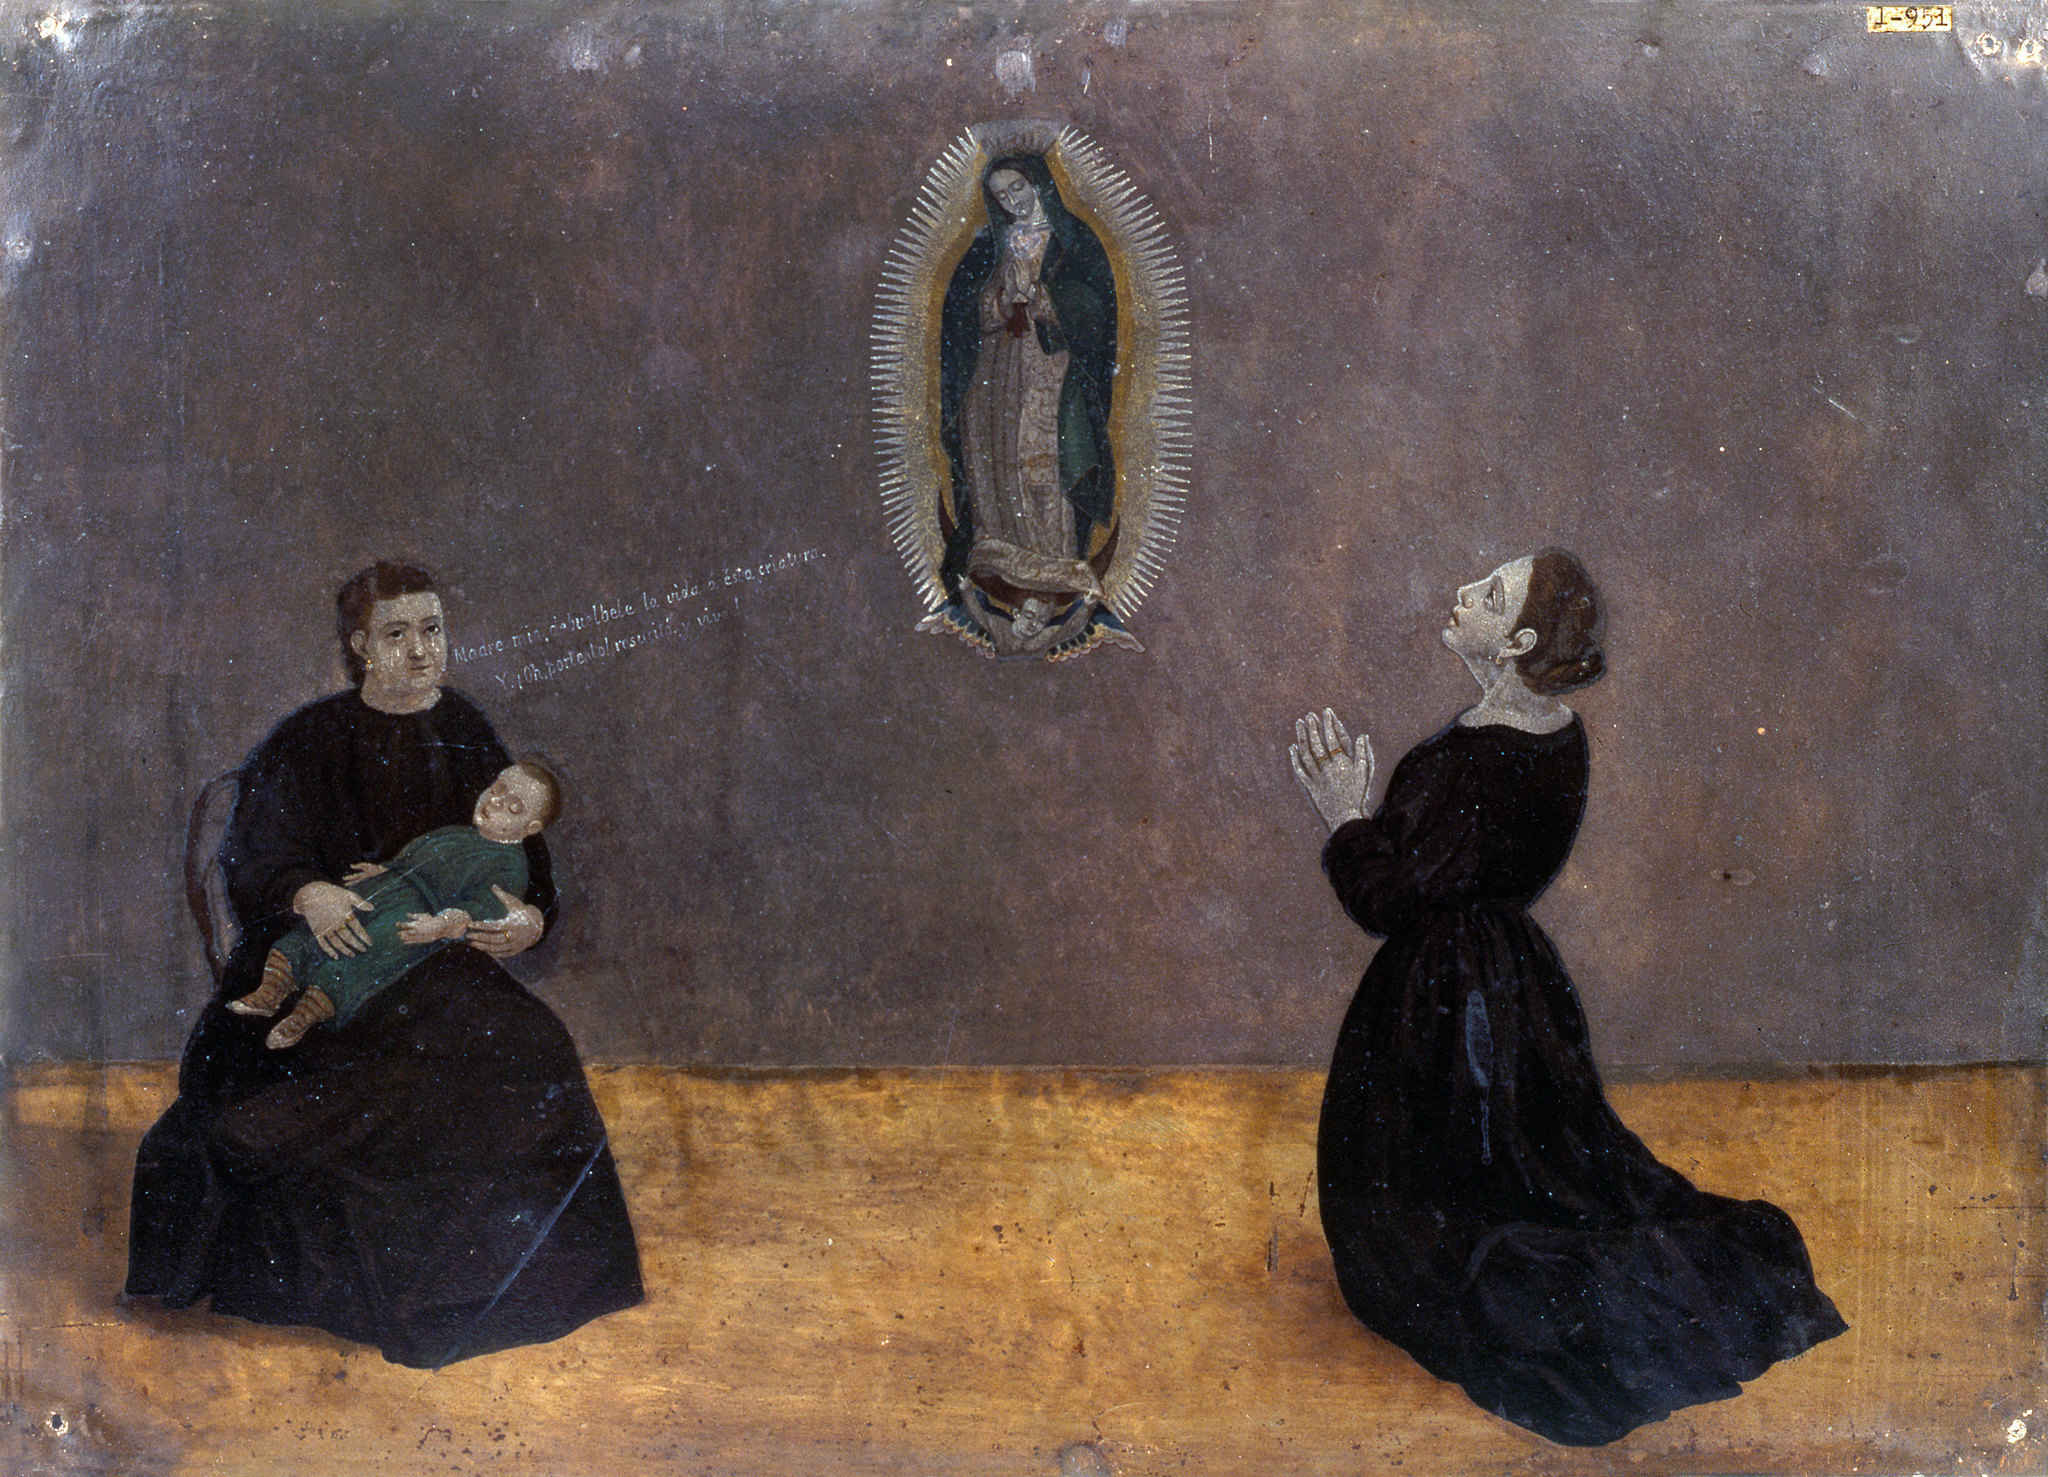 An exvoto created by an unknown artist in the late 19th century, part of an exhibition of art work inspired by the Virgin of Guadalupe at the Bowers Museum in Santa Ana.